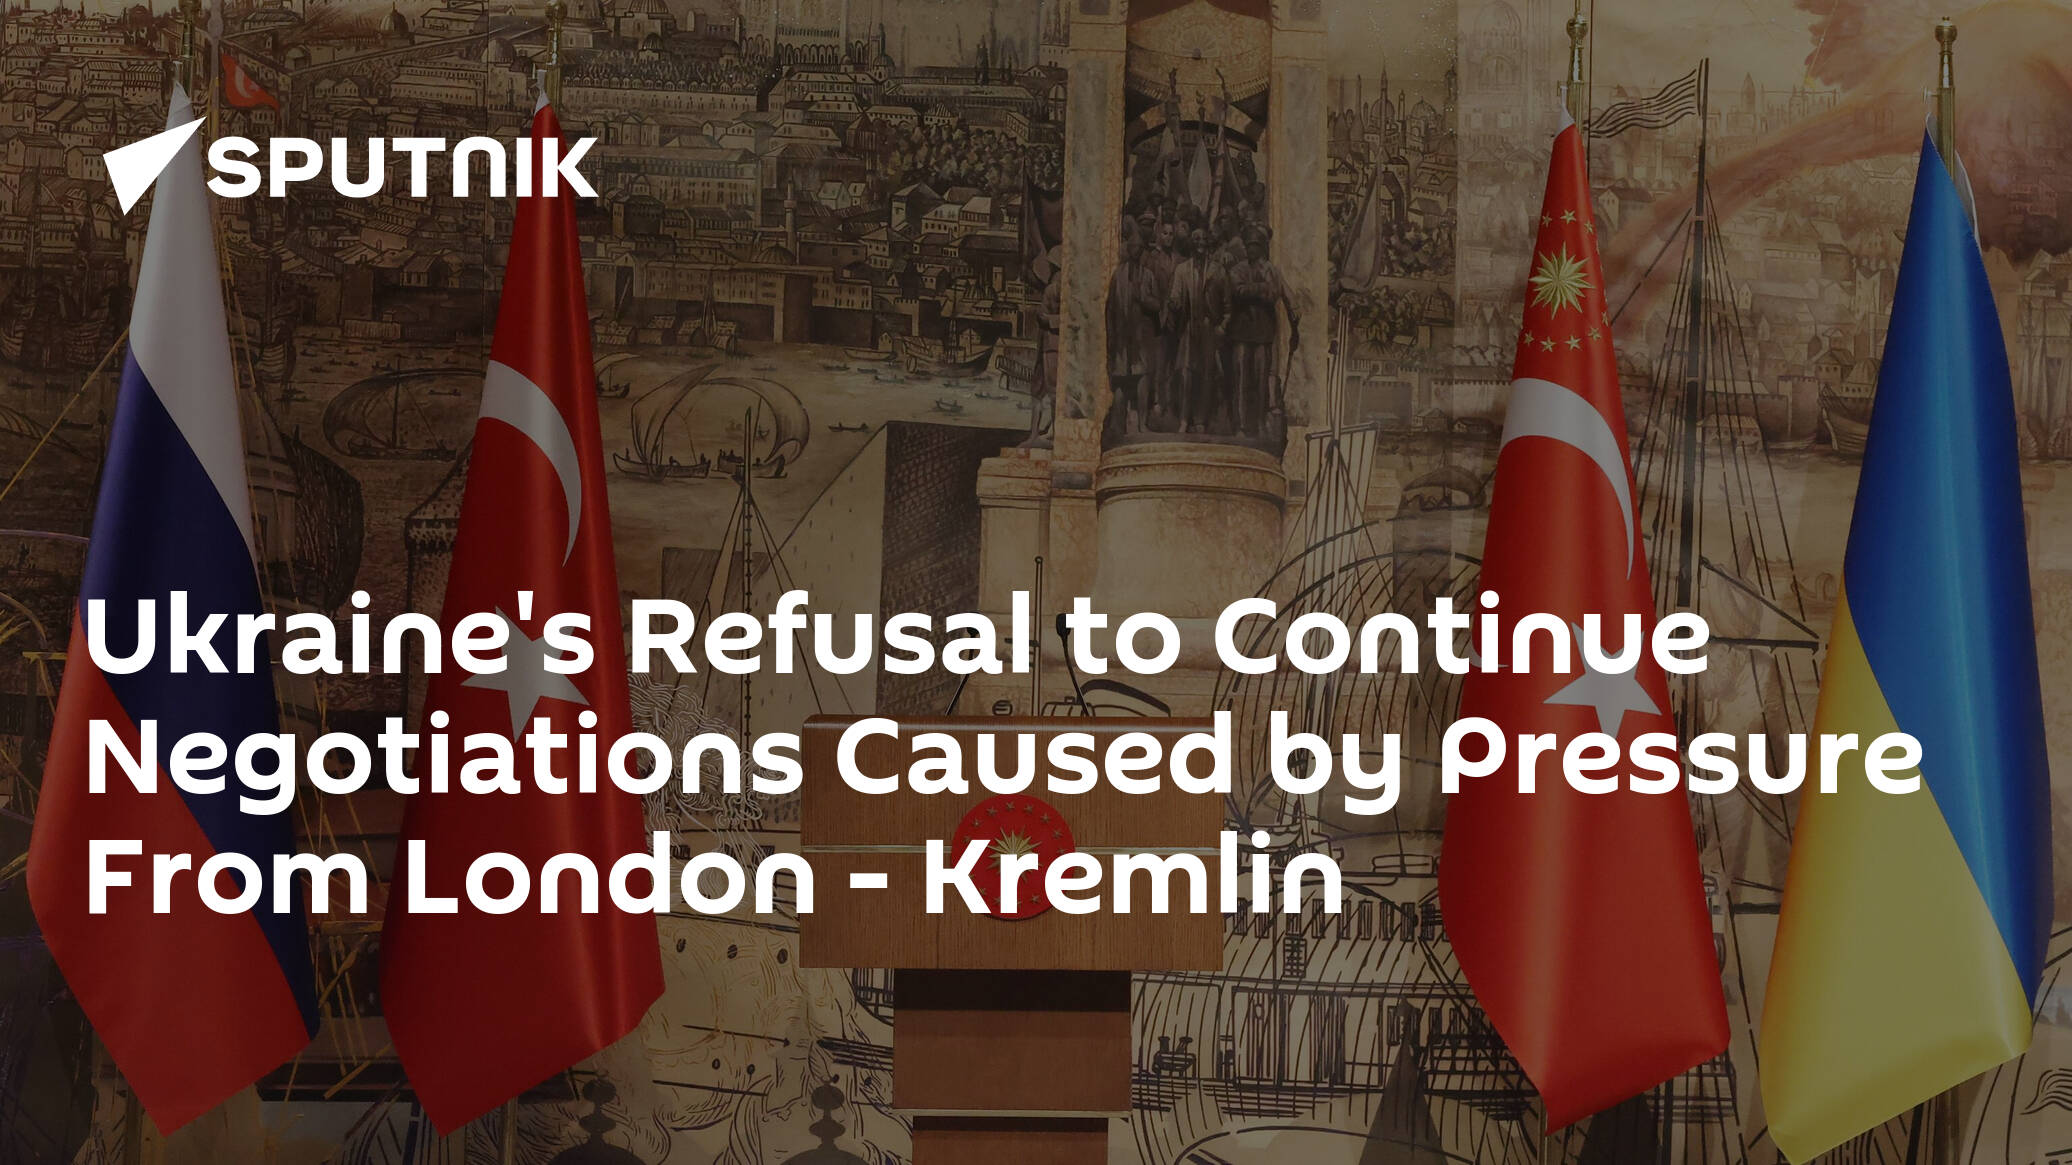 Ukraine's Refusal to Continue Negotiations Caused by Pressure From London - Kremlin